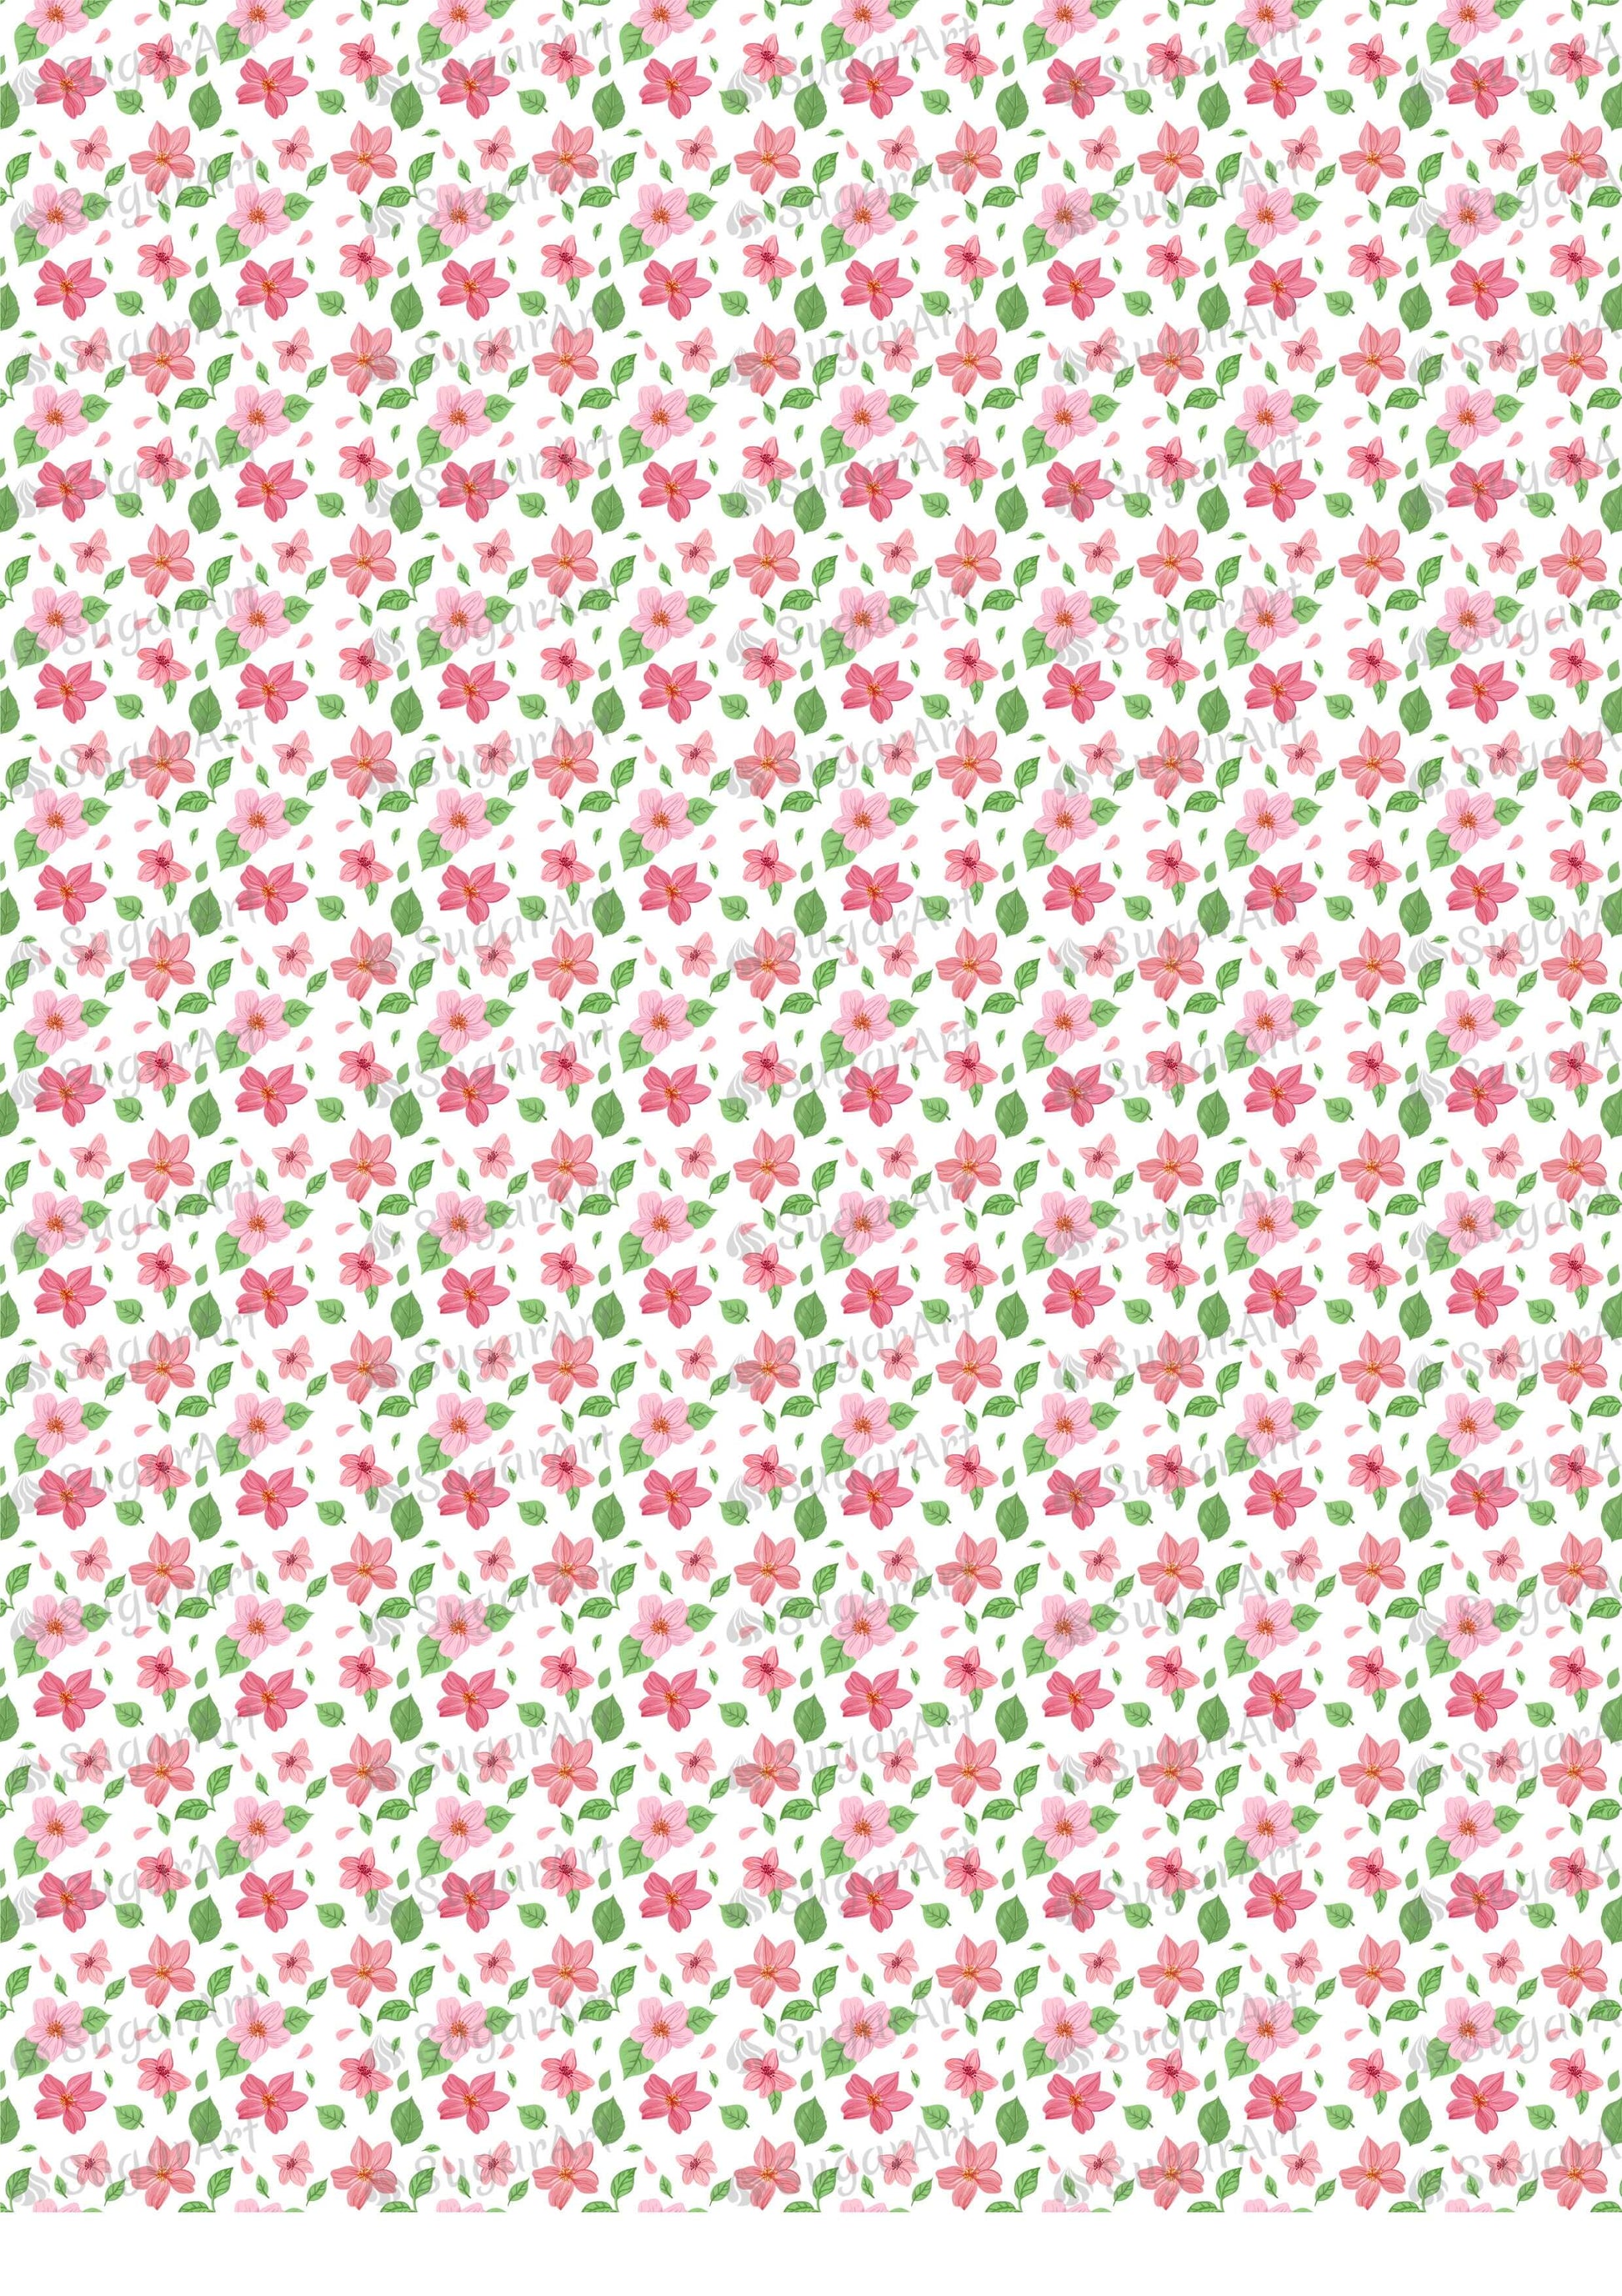 Pink Flowers with Leaves Background - BSA039.